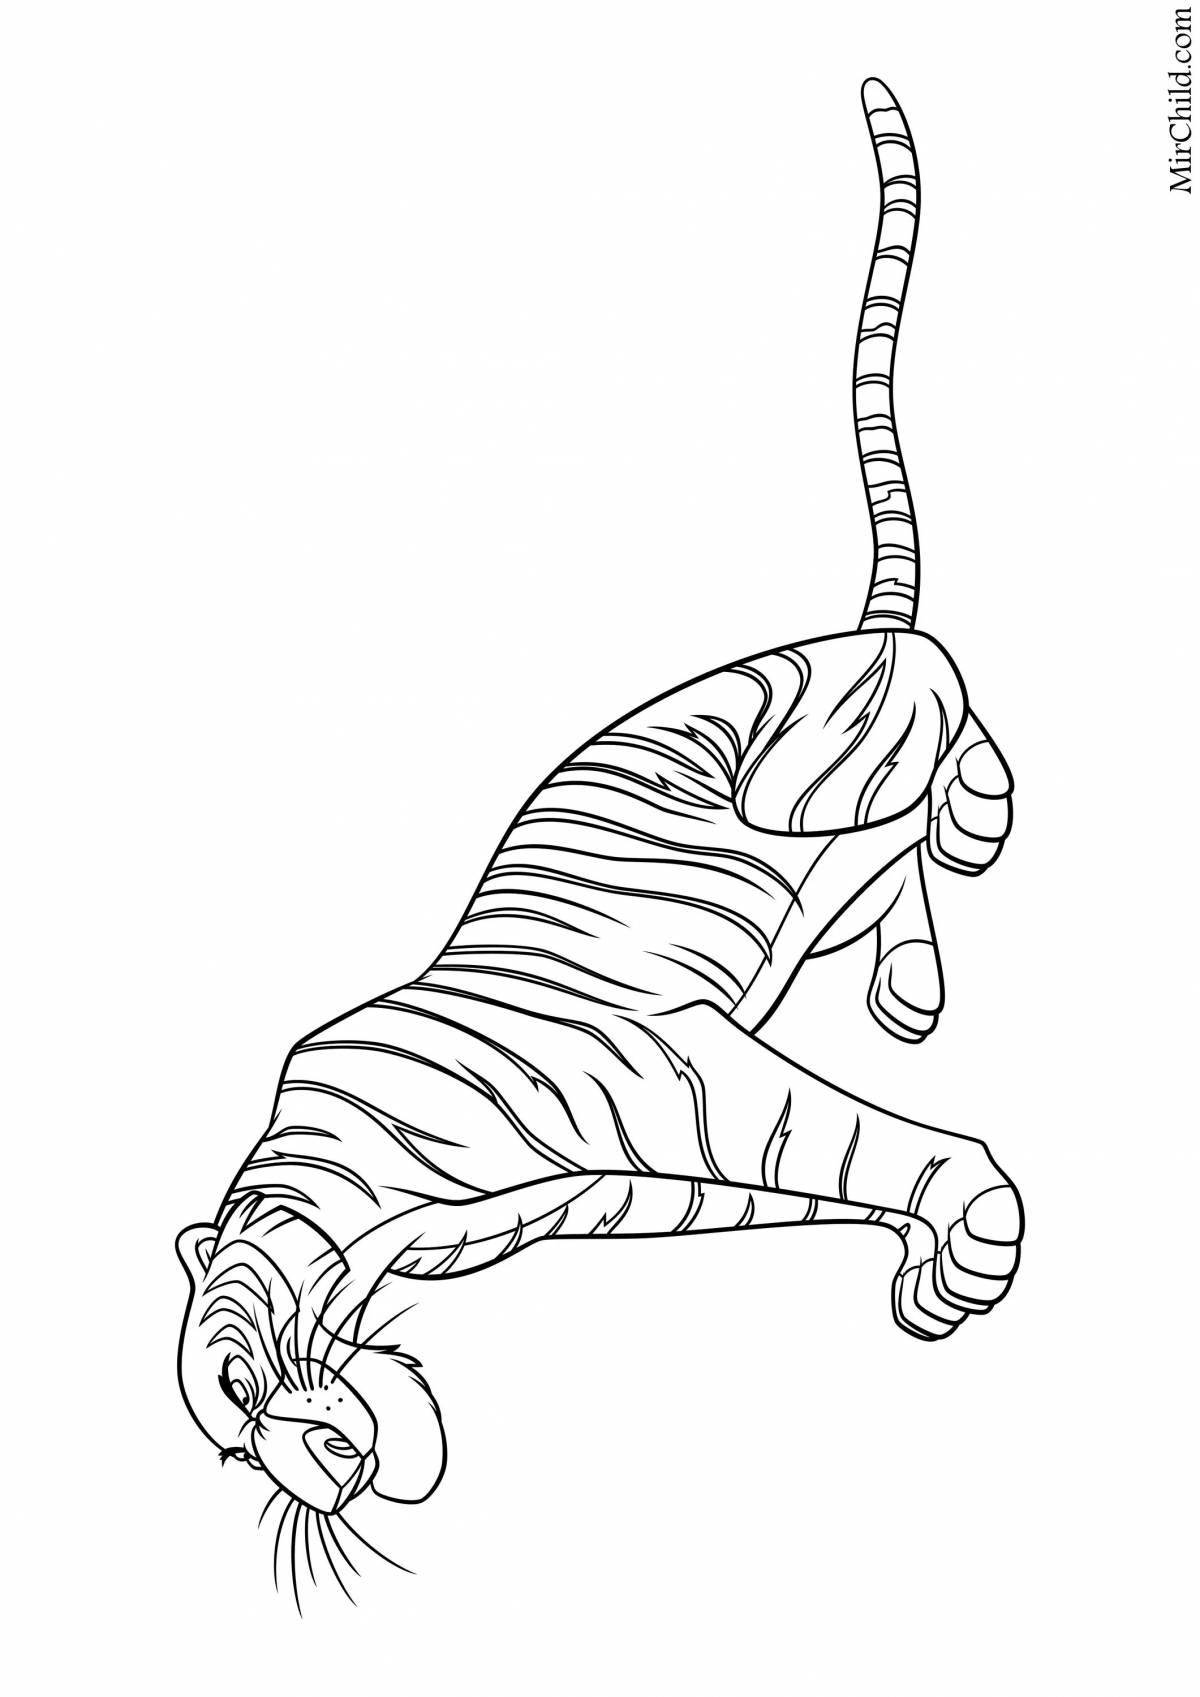 Coloring book exquisite tiger sherkhan